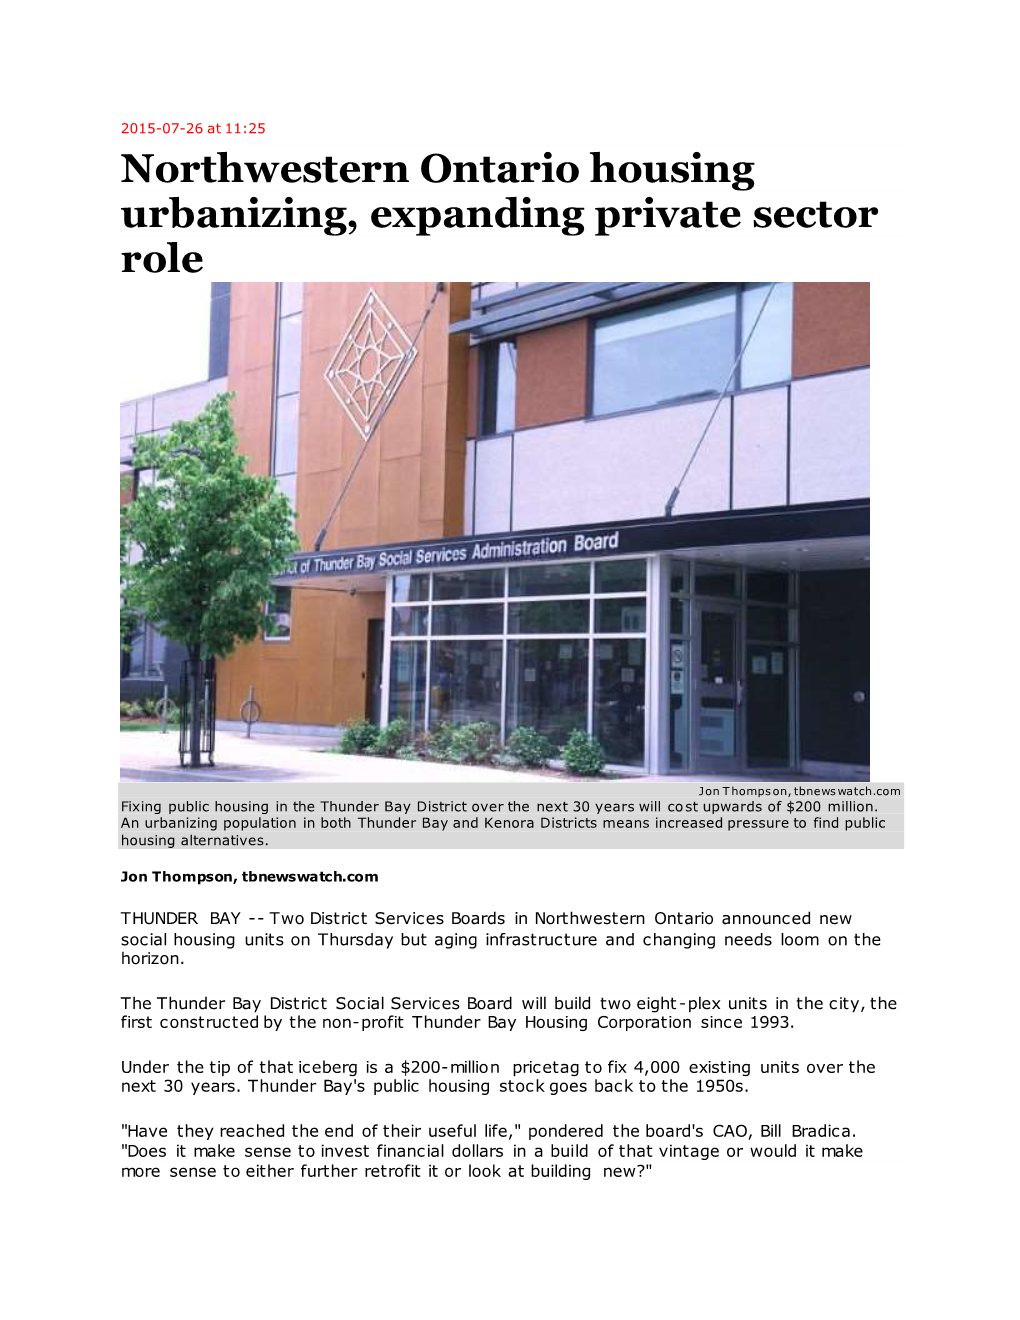 Northwestern Ontario Housing Urbanizing, Expanding Private Sector Role